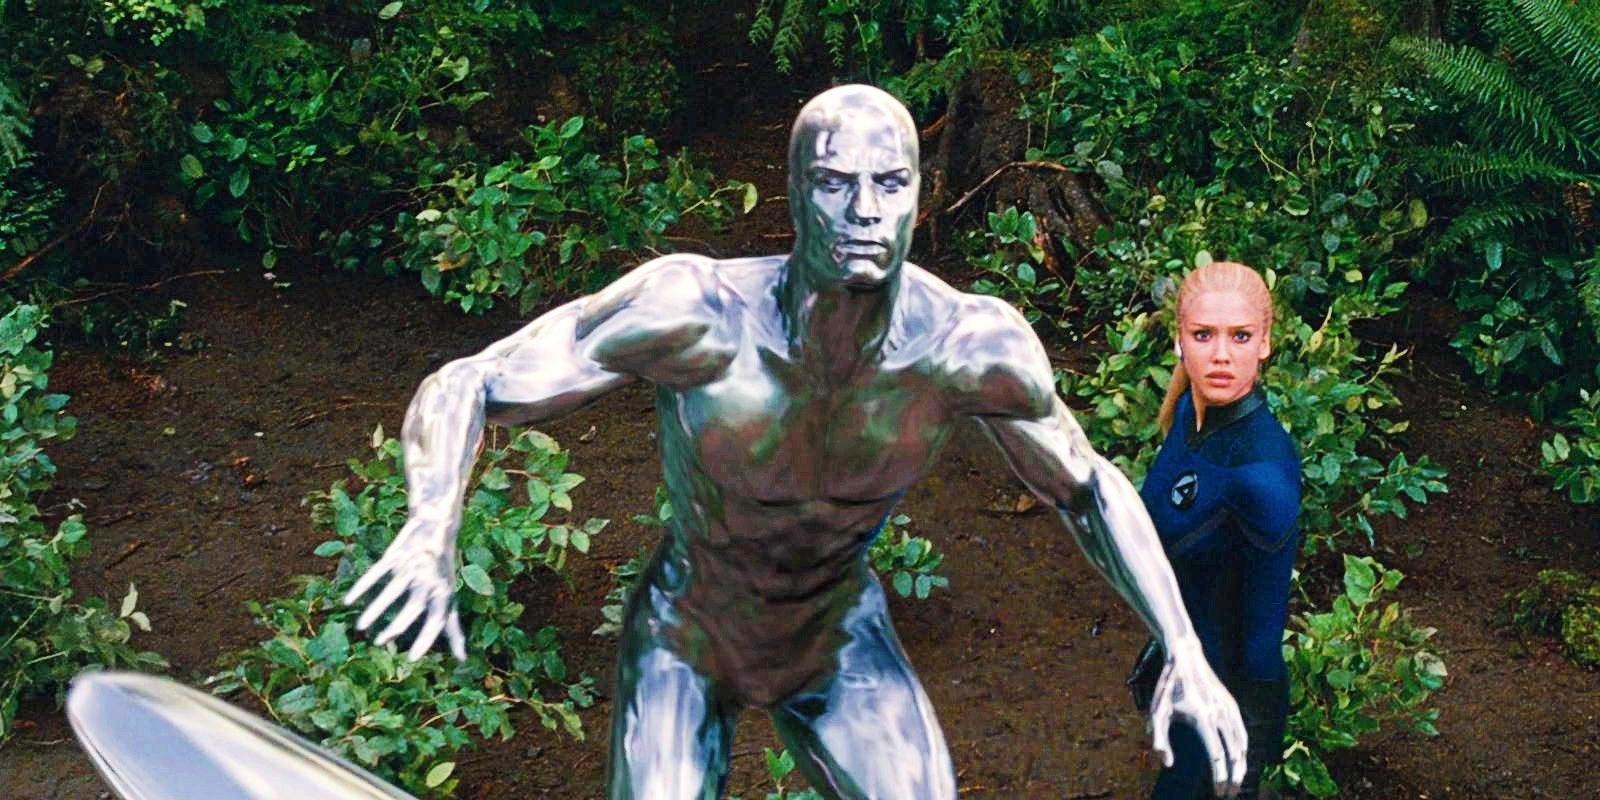 Silver Surfer Prepared To Fight With Sue Storm Behind Him In Fantastic Four Rise of the Silver Surfer